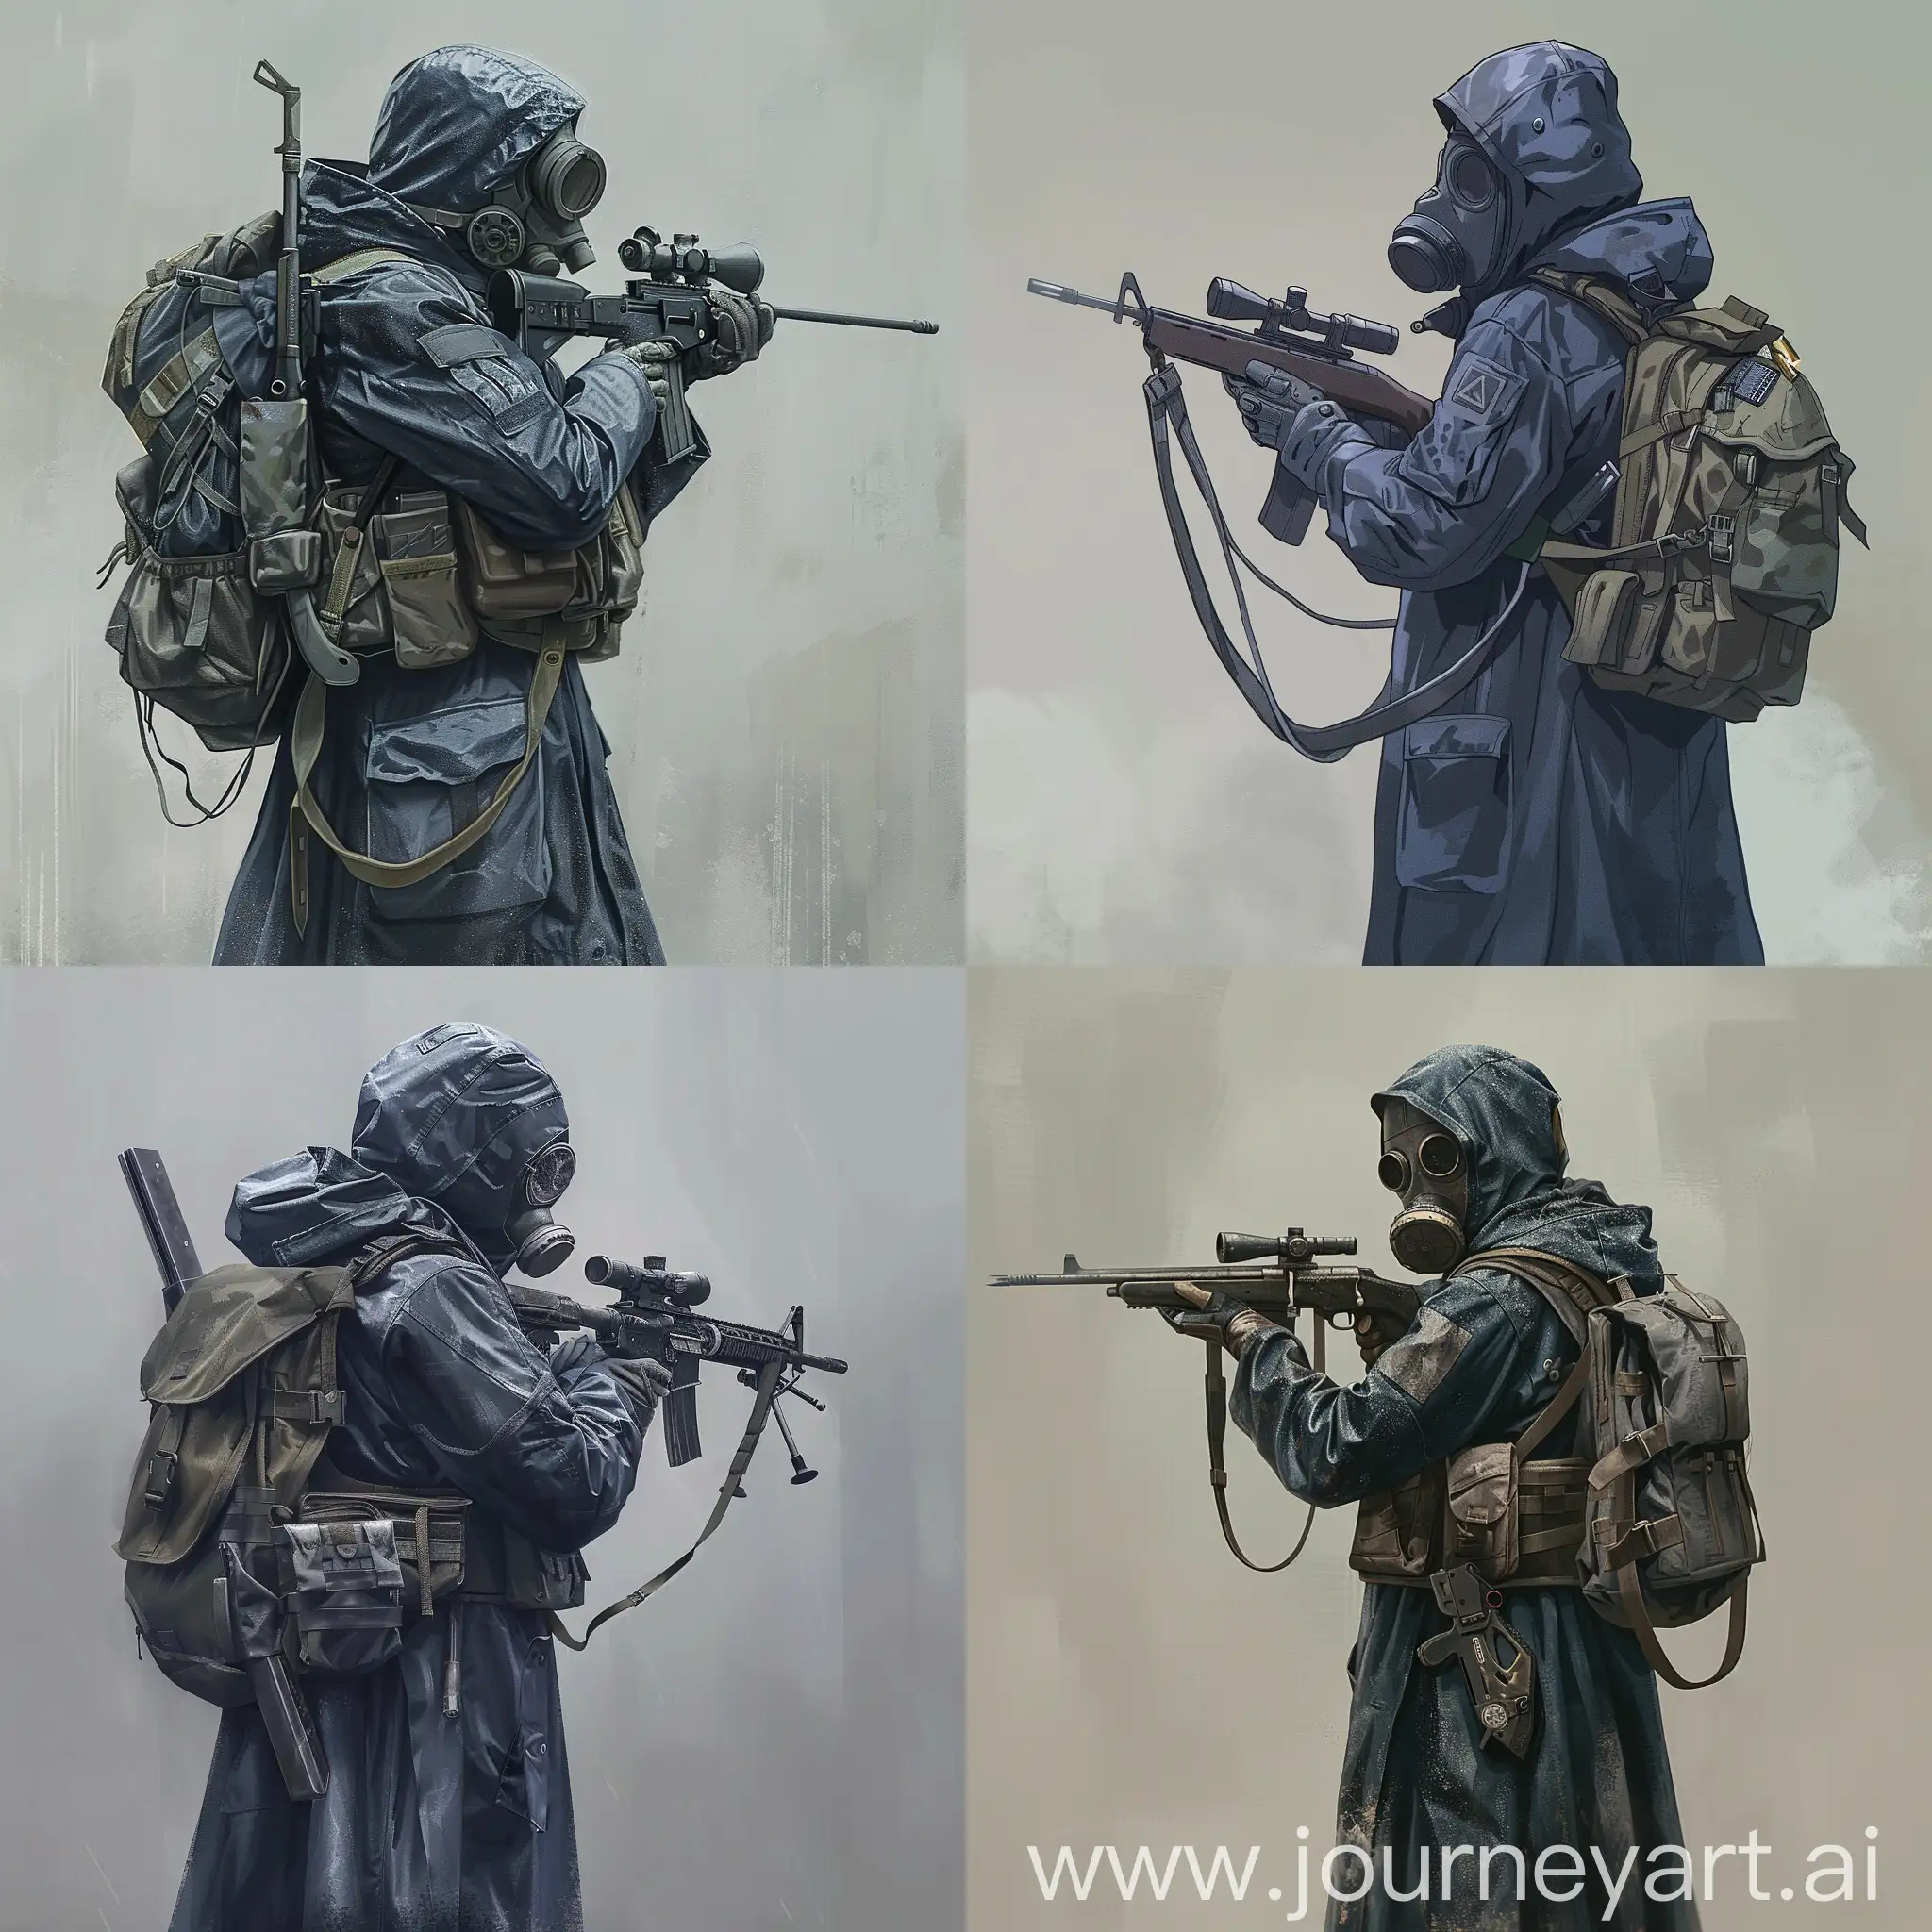 Concept art a mercenary from the universe of S.T.A.L.K.E.R., a mercenary dressed in a dark blue military raincoat, gray military armor on his body, a gas mask on his face, a small military backpack on his back, sniper rifle in his hands, manga concept art character style.